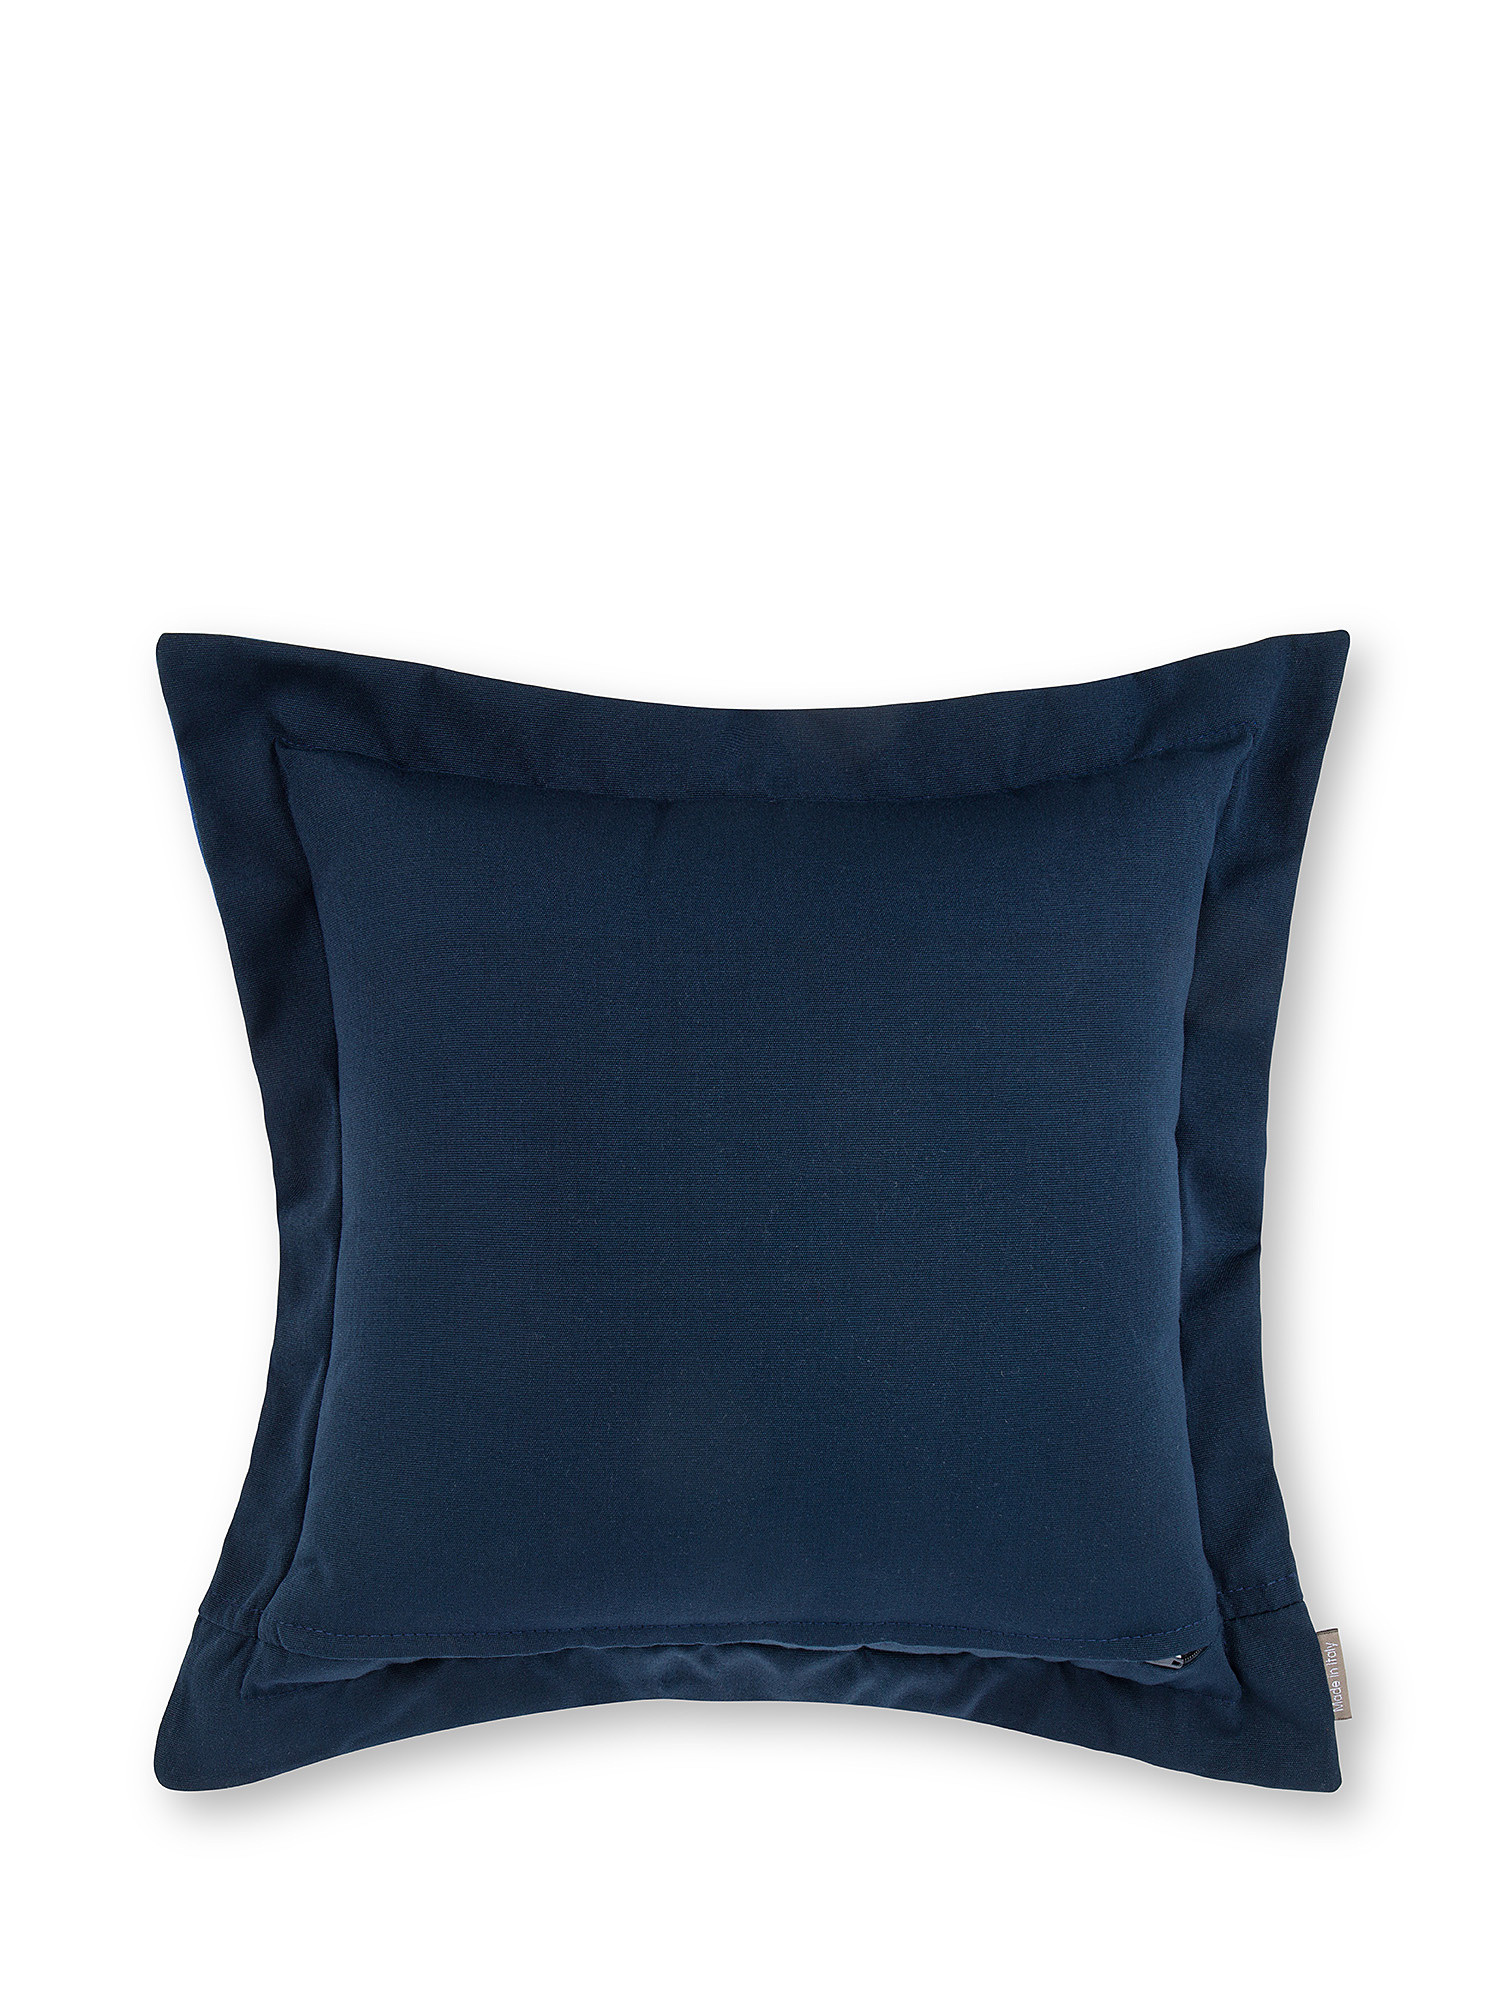 Outdoor cushion in double color fabric 45x45cm, Blue, large image number 1